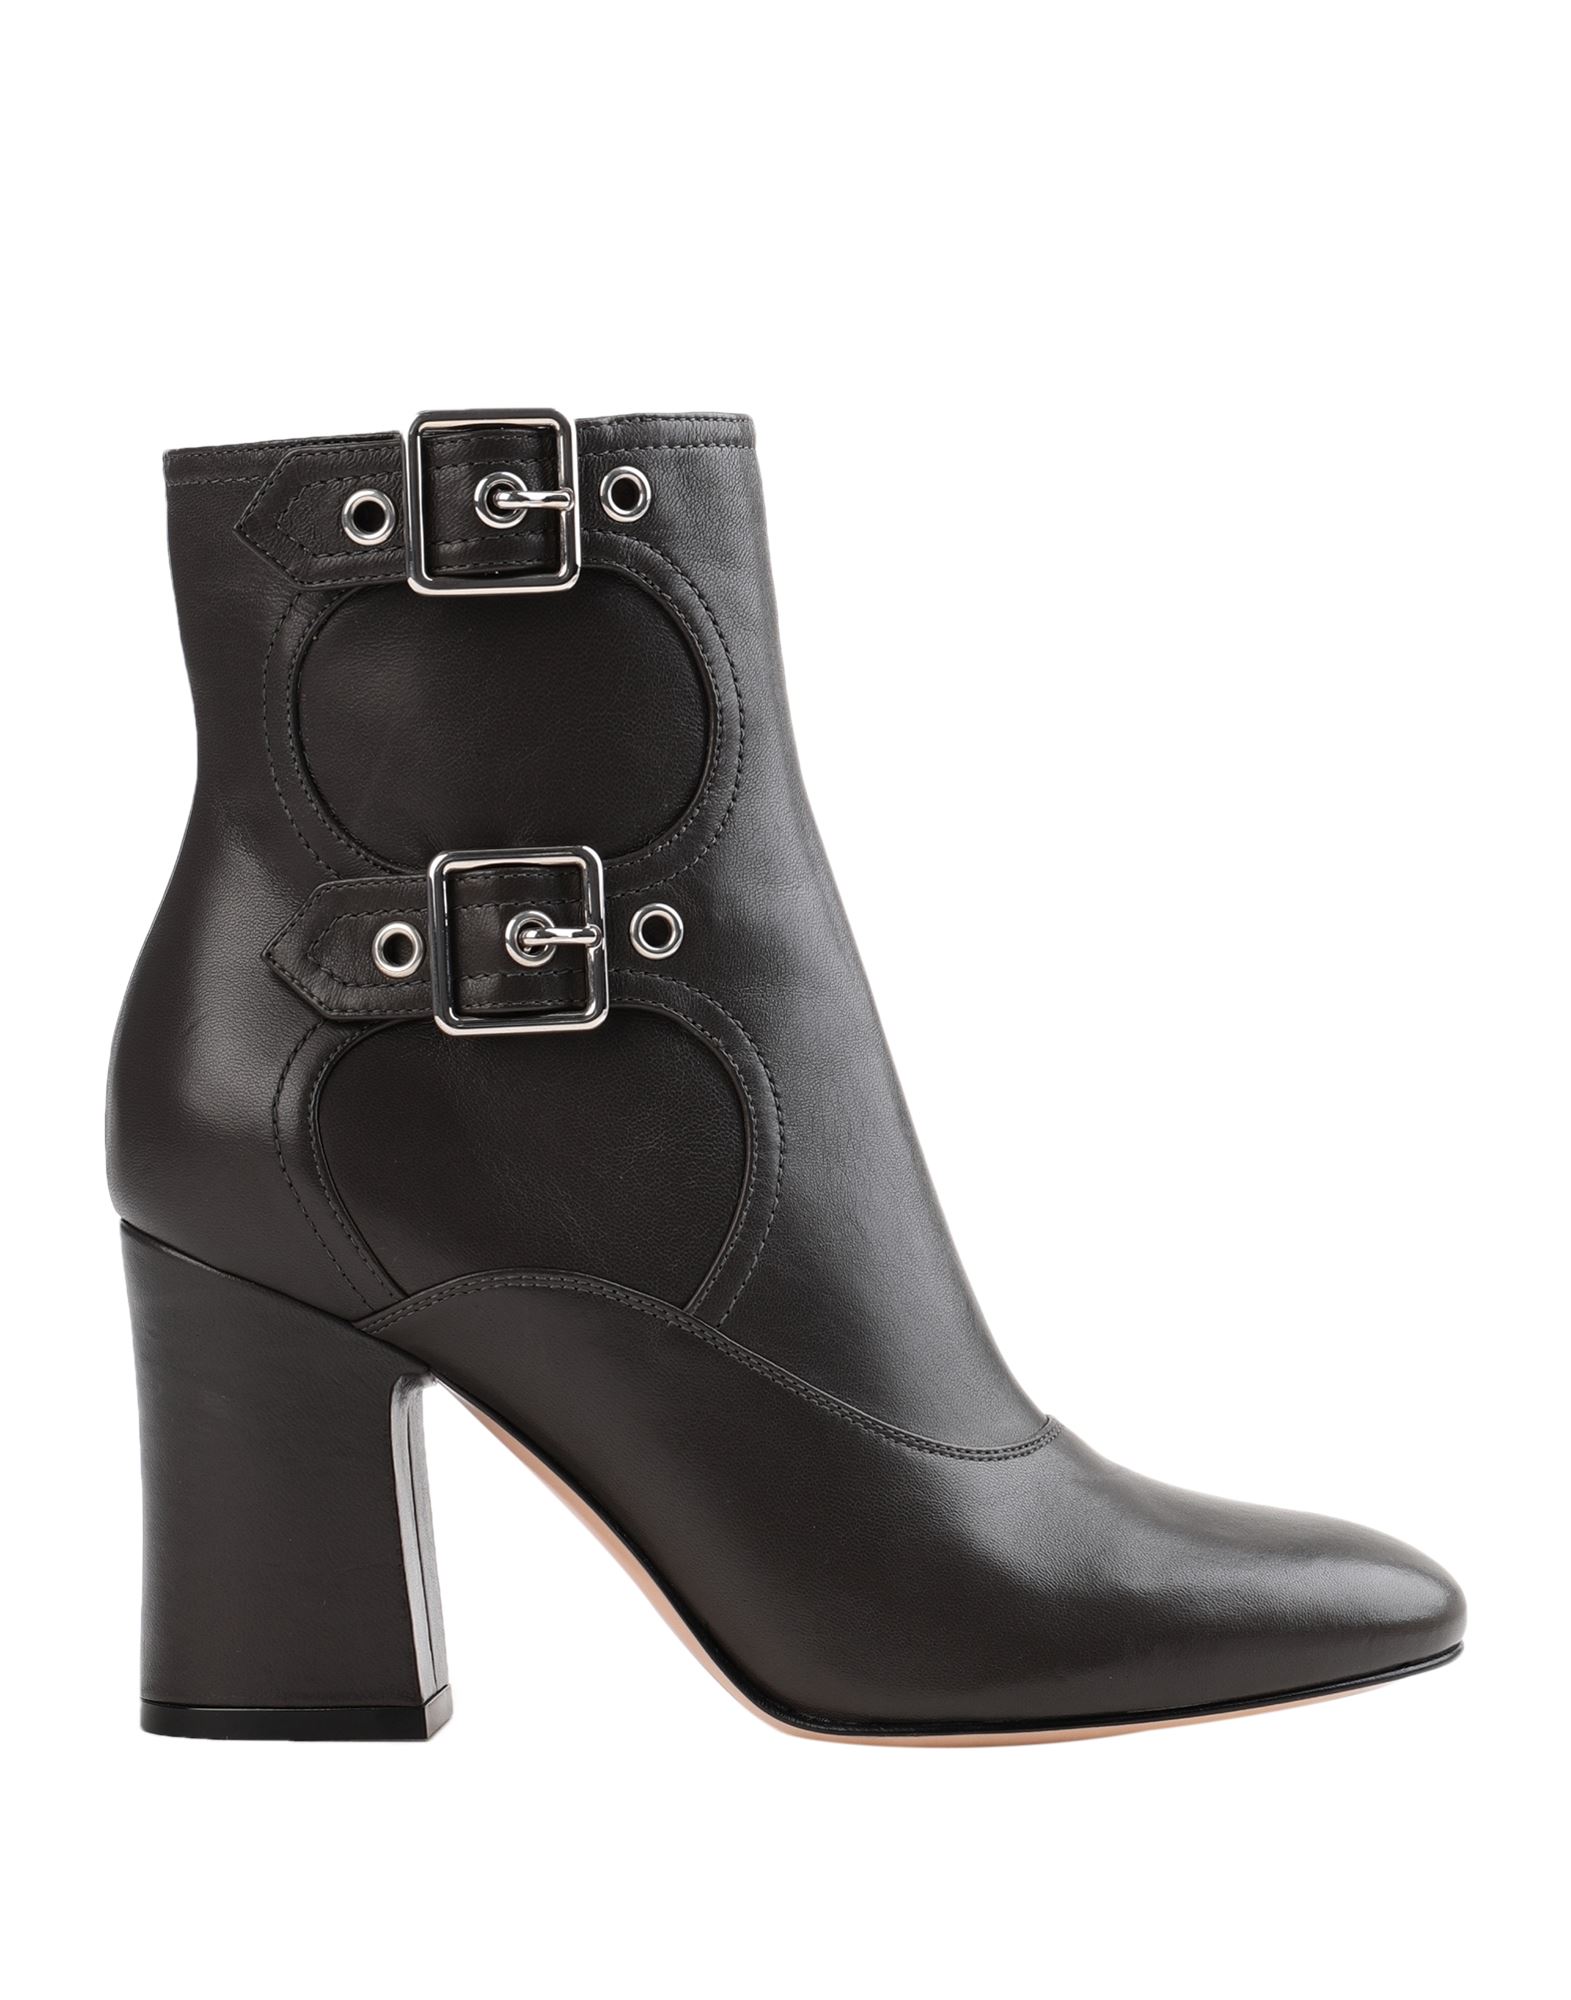 GIANVITO ROSSI Ankle boots - Item 11972441